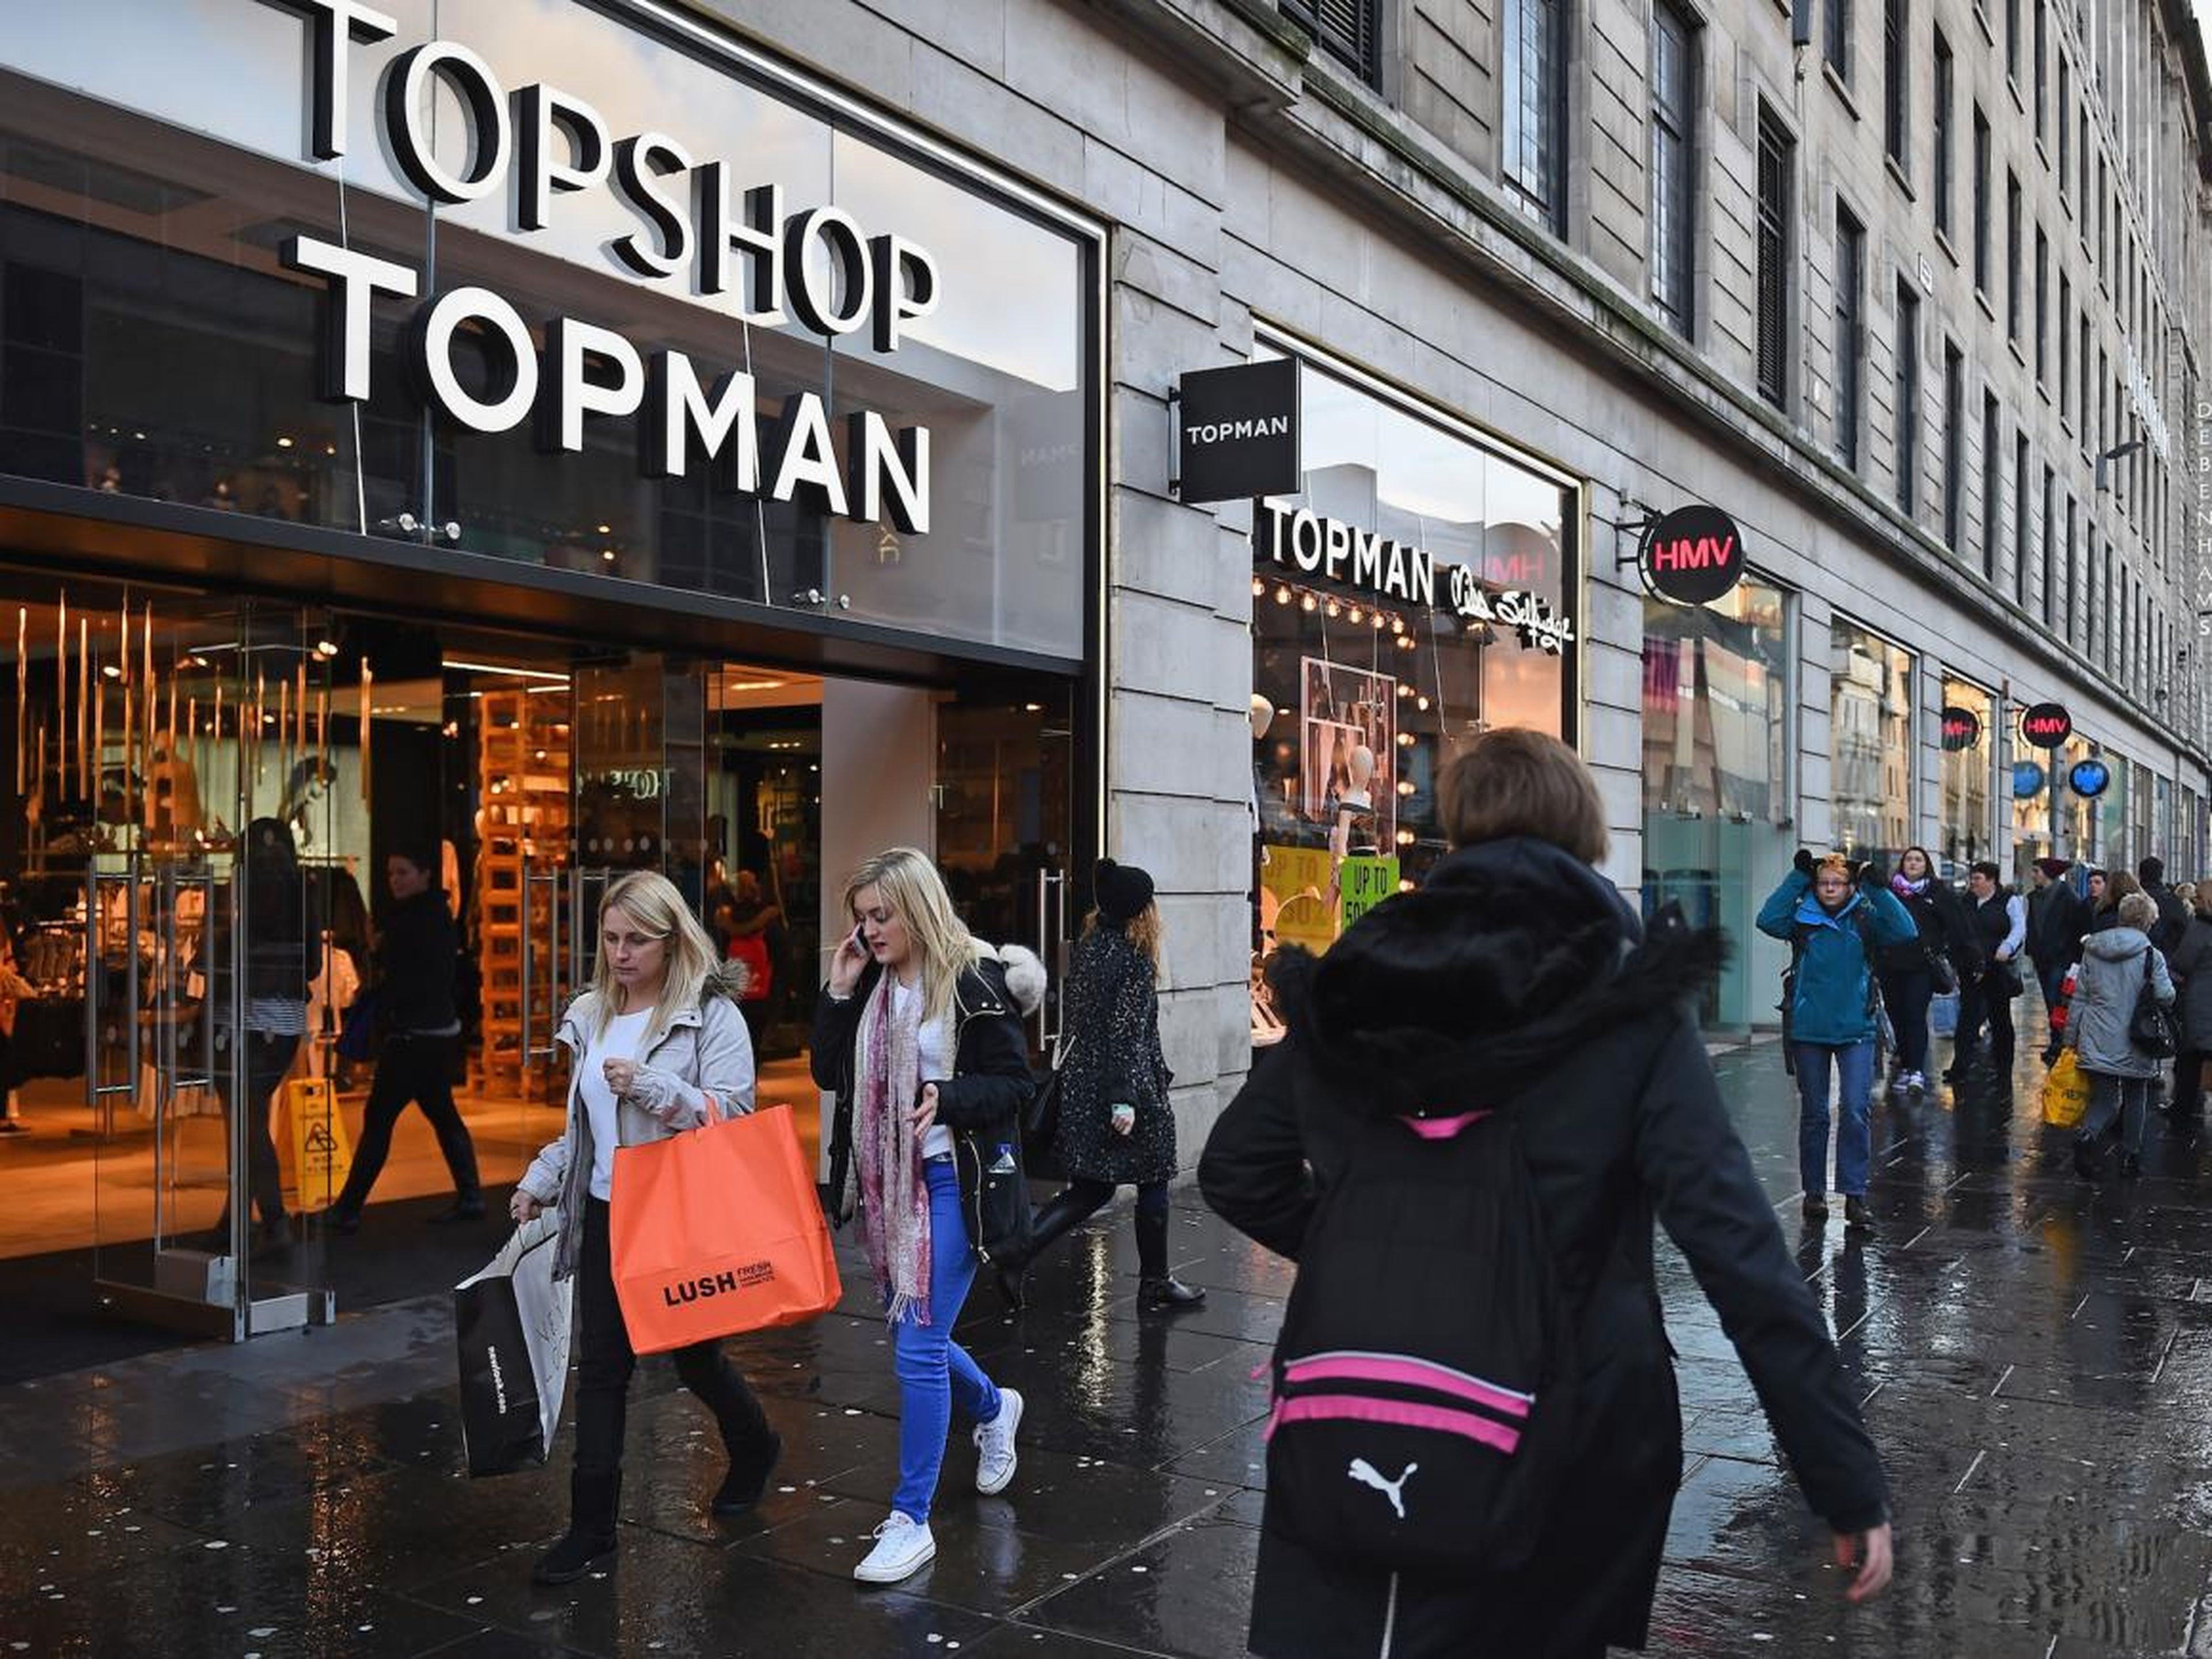 Stores like English chains House of Fraser and Topshop, as well as Amazon online, are offering Black Friday deals for things like clothing and electronics in 2018.